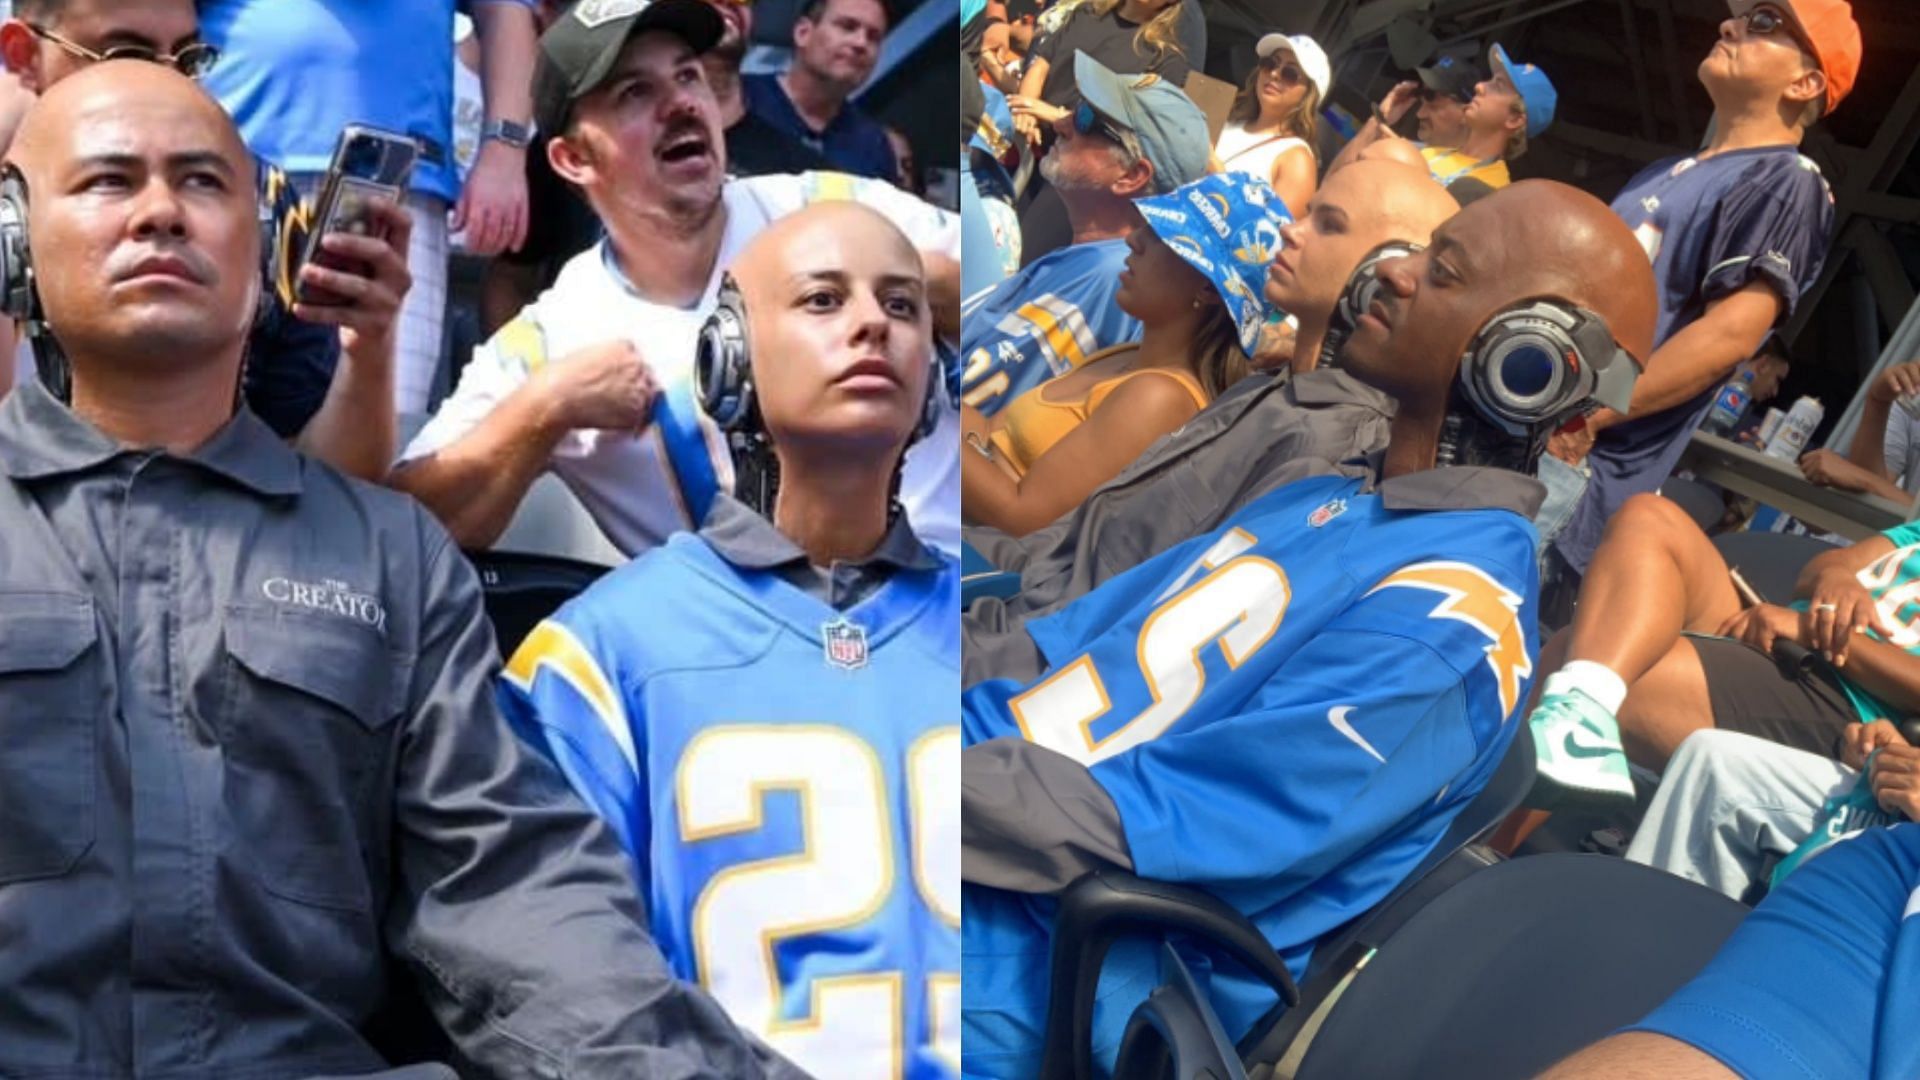 CapCut_AI Robo s S eal The Show A The Chargers Game